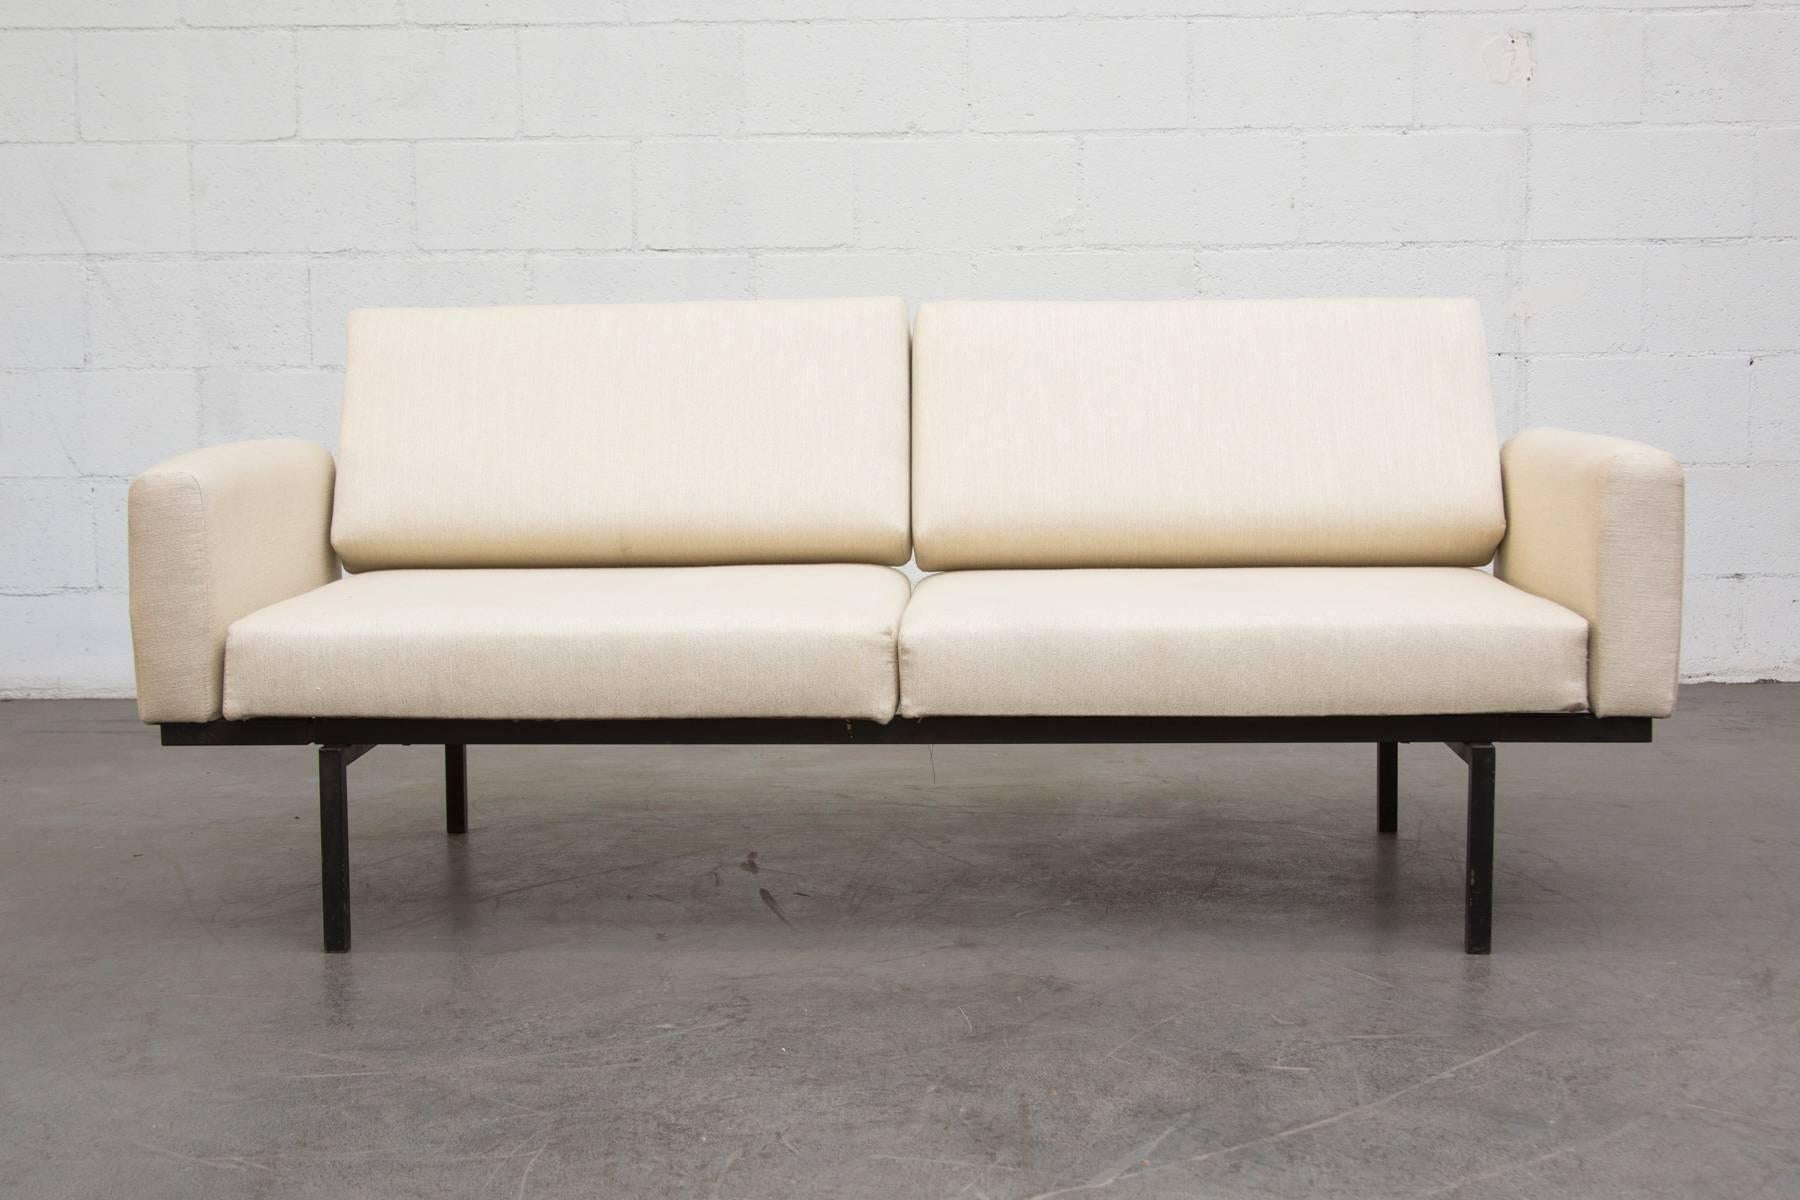 Rare conversion sofa to bed with armrests from Coen de Vries for Pilastro. Newly upholstered cream with black enameled metal frame. When as a daybed it measures 88.25 x 31.75 x 15/26.125. Frame in very original condition with visible signs of wear